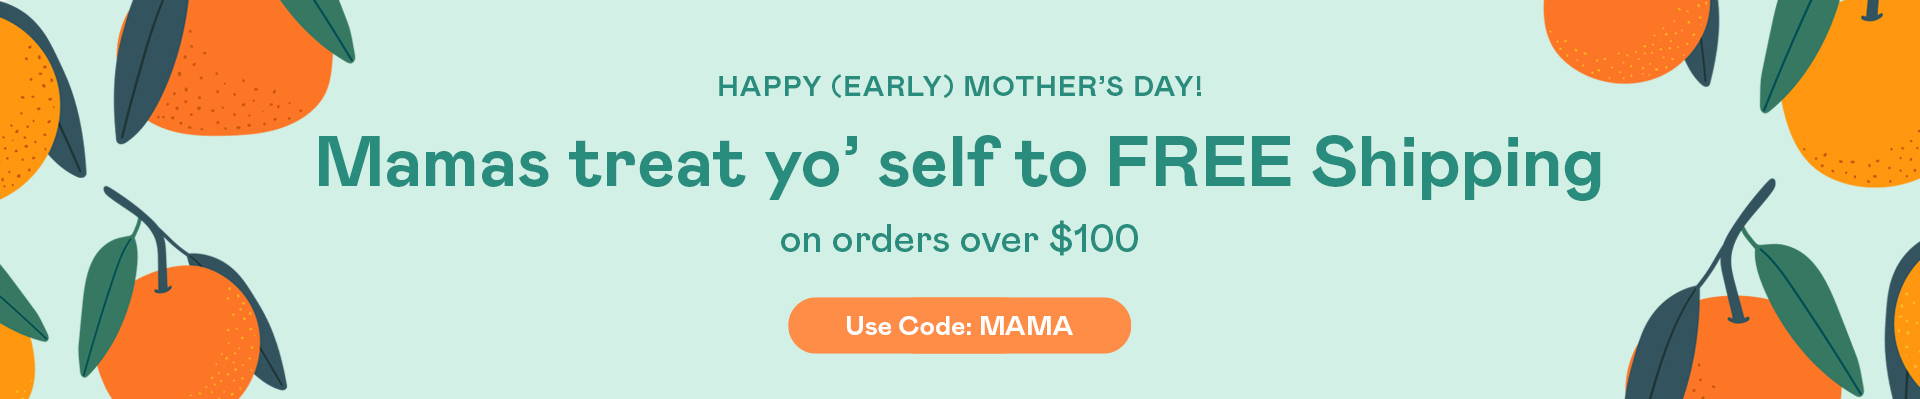 Free Shipping on orders over $100 with code : MAMA